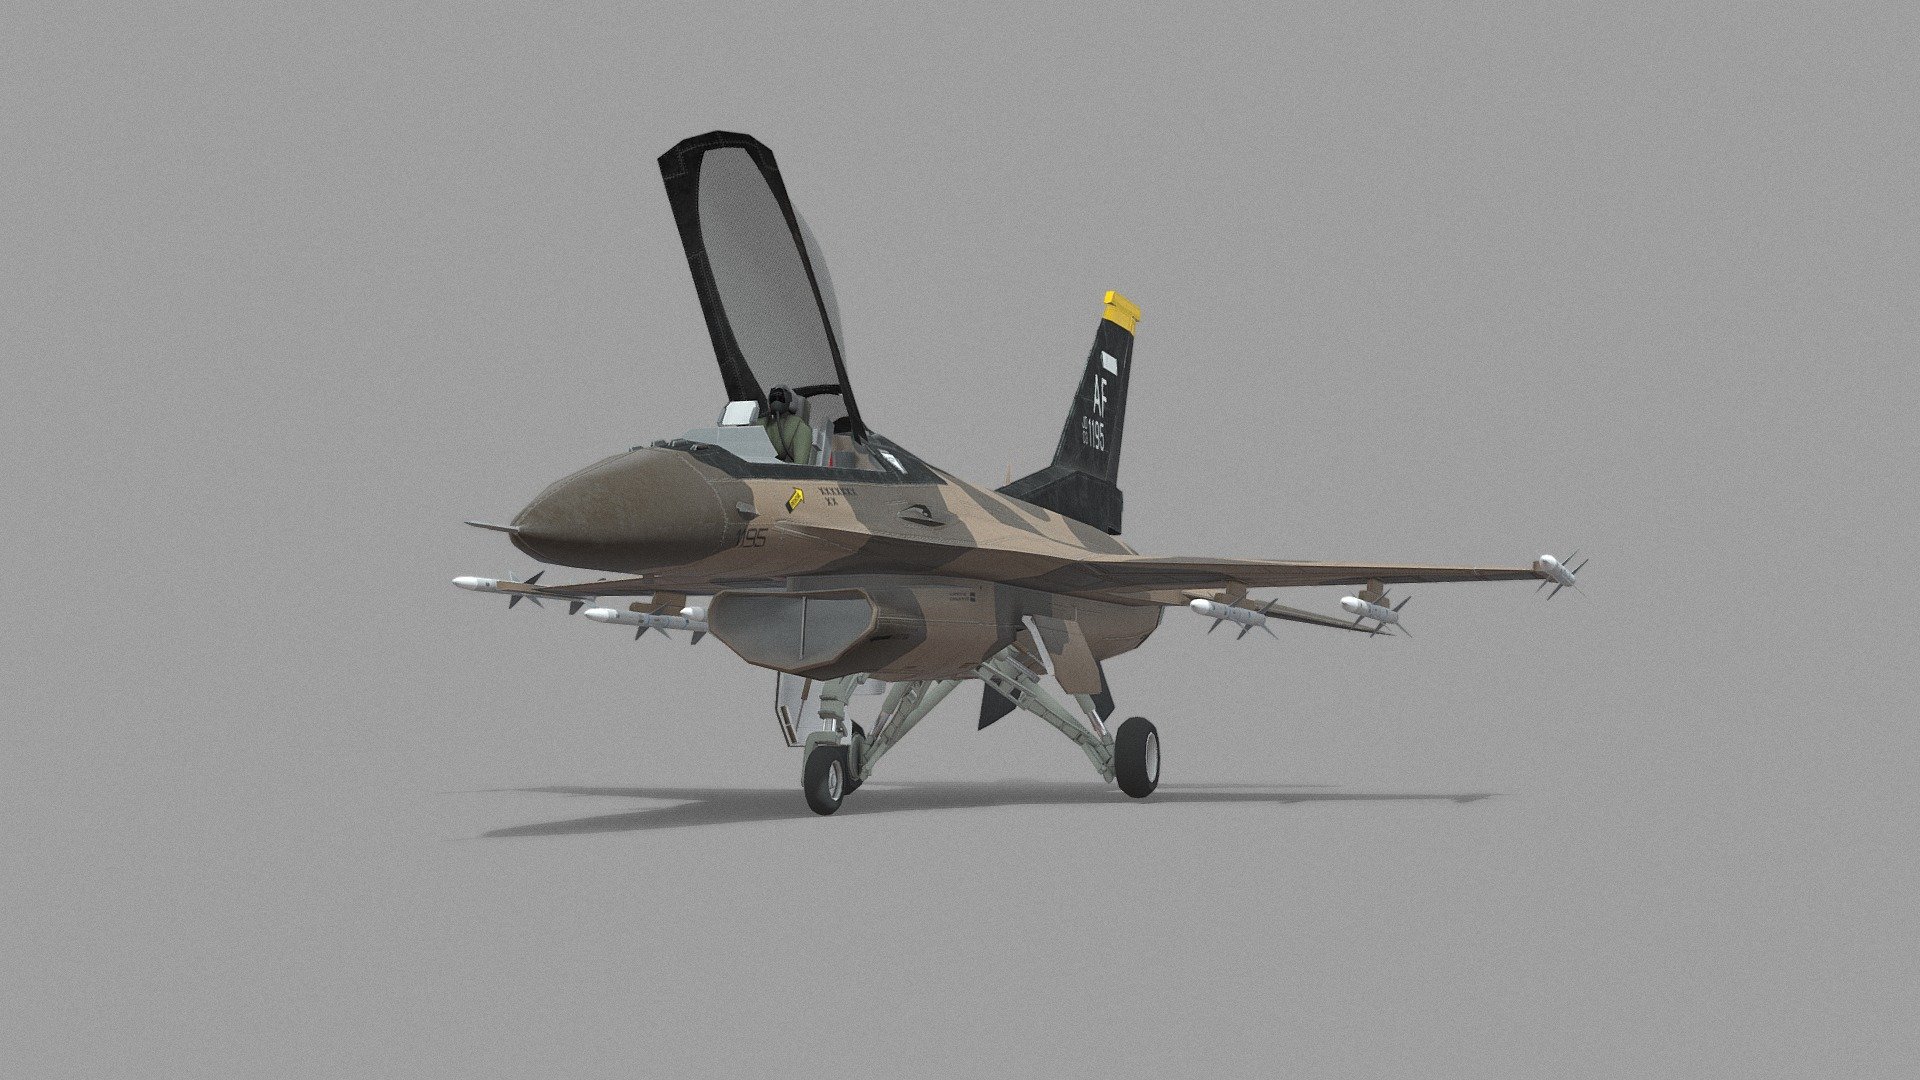 This version focuses on the new desert camo livery! Please let me know in the comments if there is any other liveries you would like to see on this model - F-16 | Desert Camo Livery - 3D model by Jacobdesigns 3d model